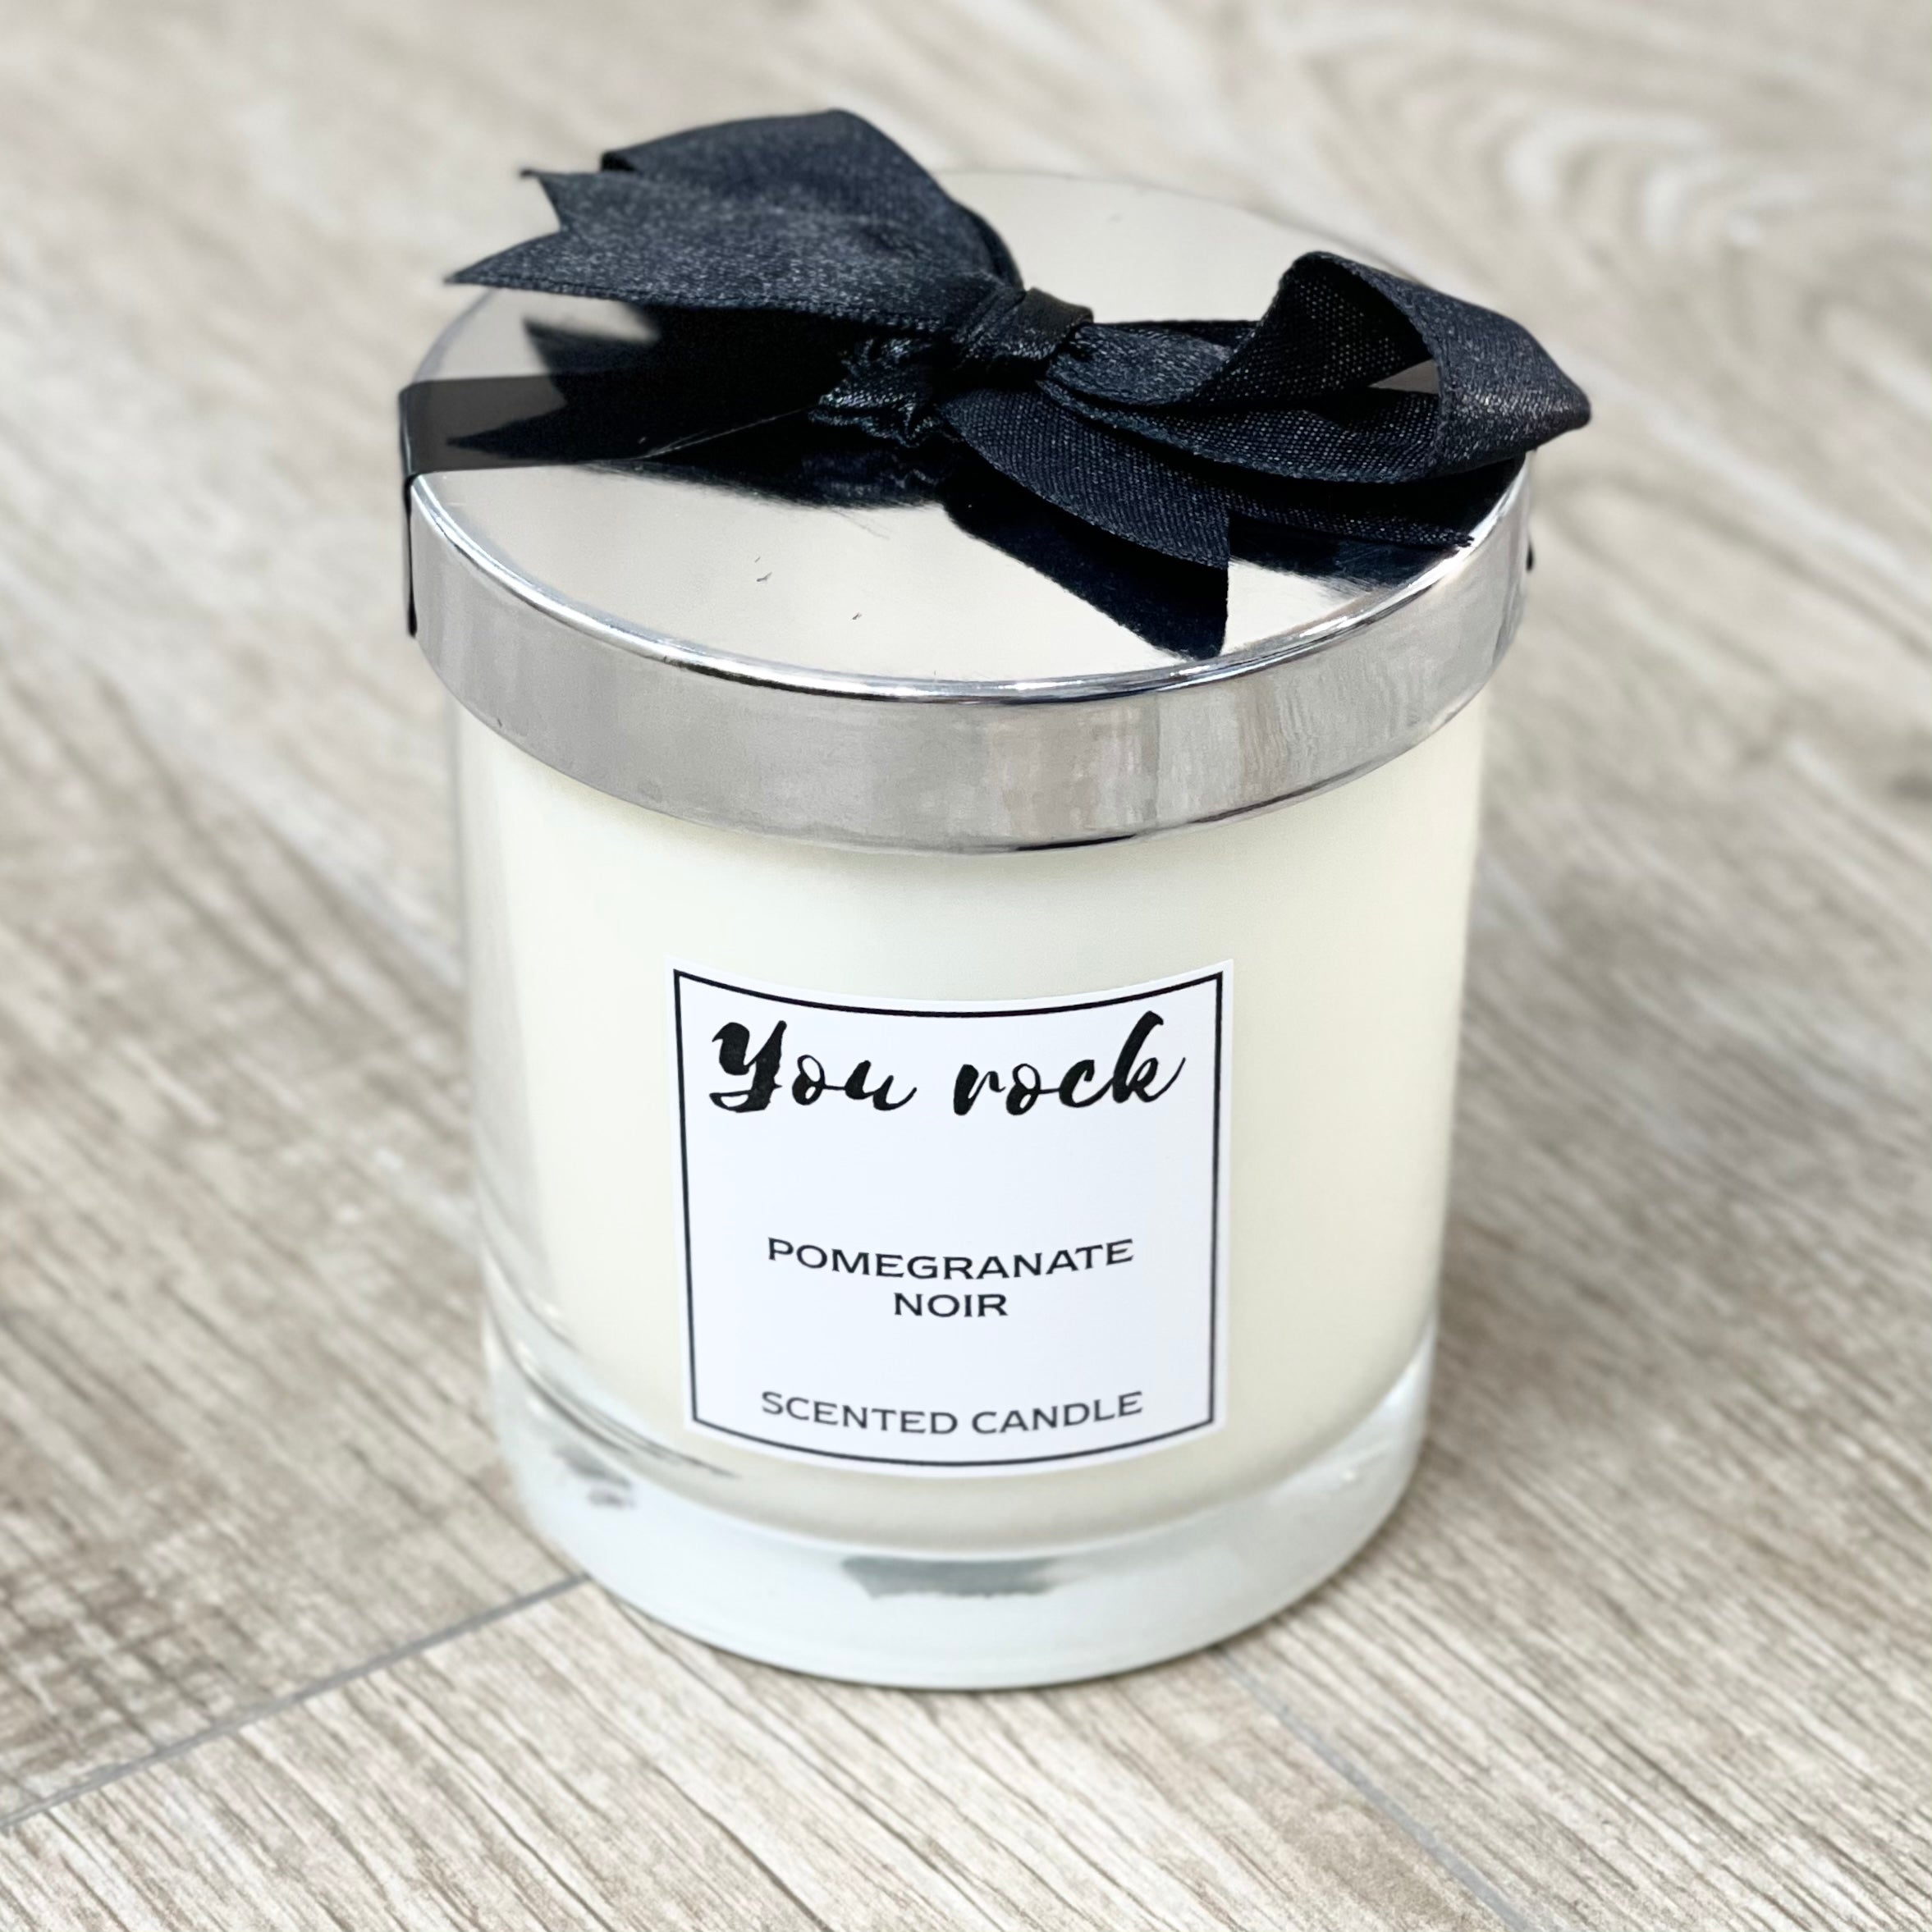 Natural Soy Wax Scented Candle -  Pomegranate Noir  Fragrance 